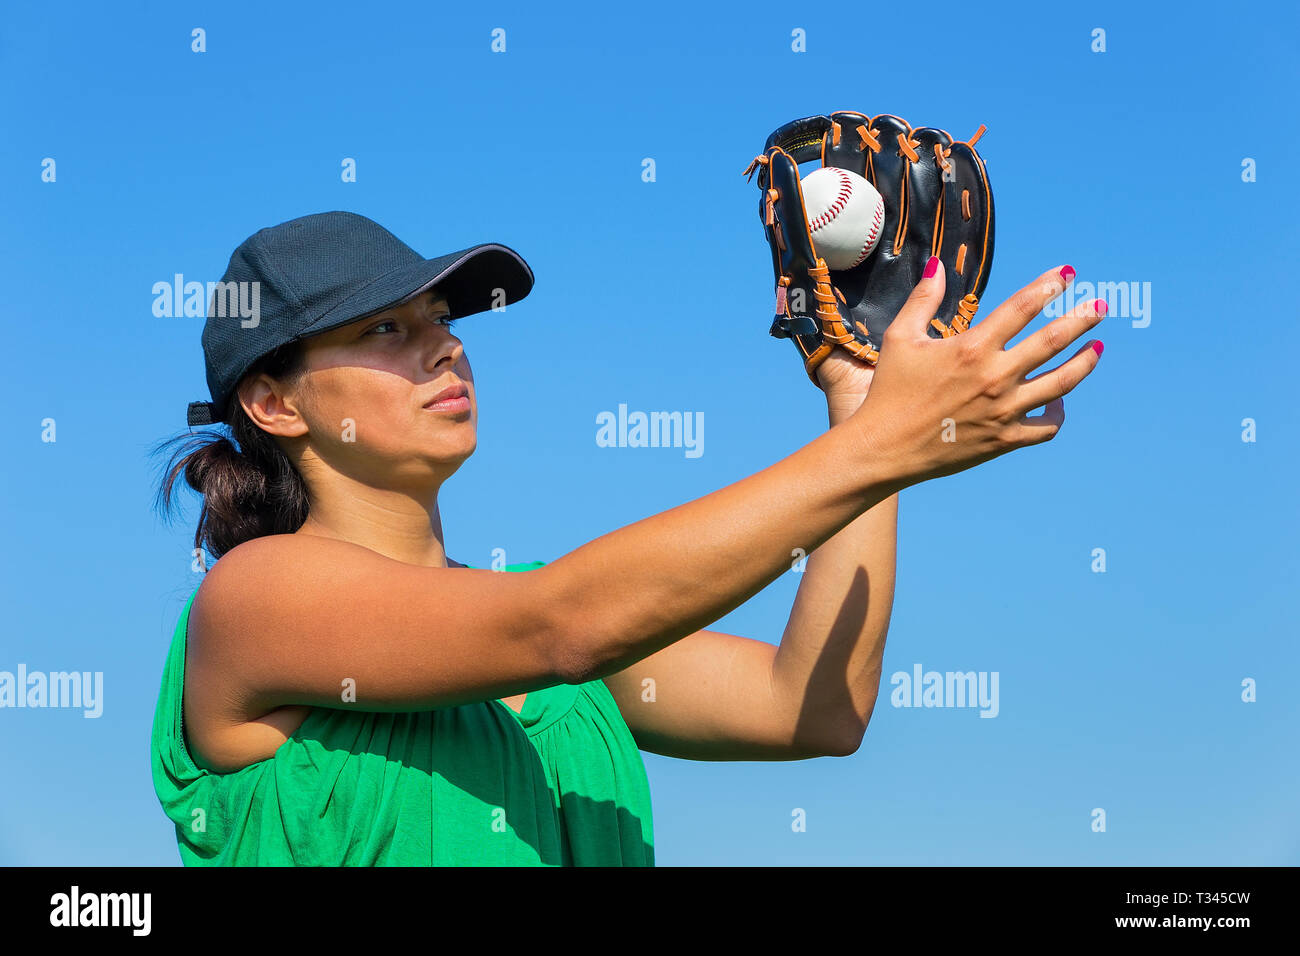 Colombian woman with glove and cap catching baseball outdoors with blue sky Stock Photo